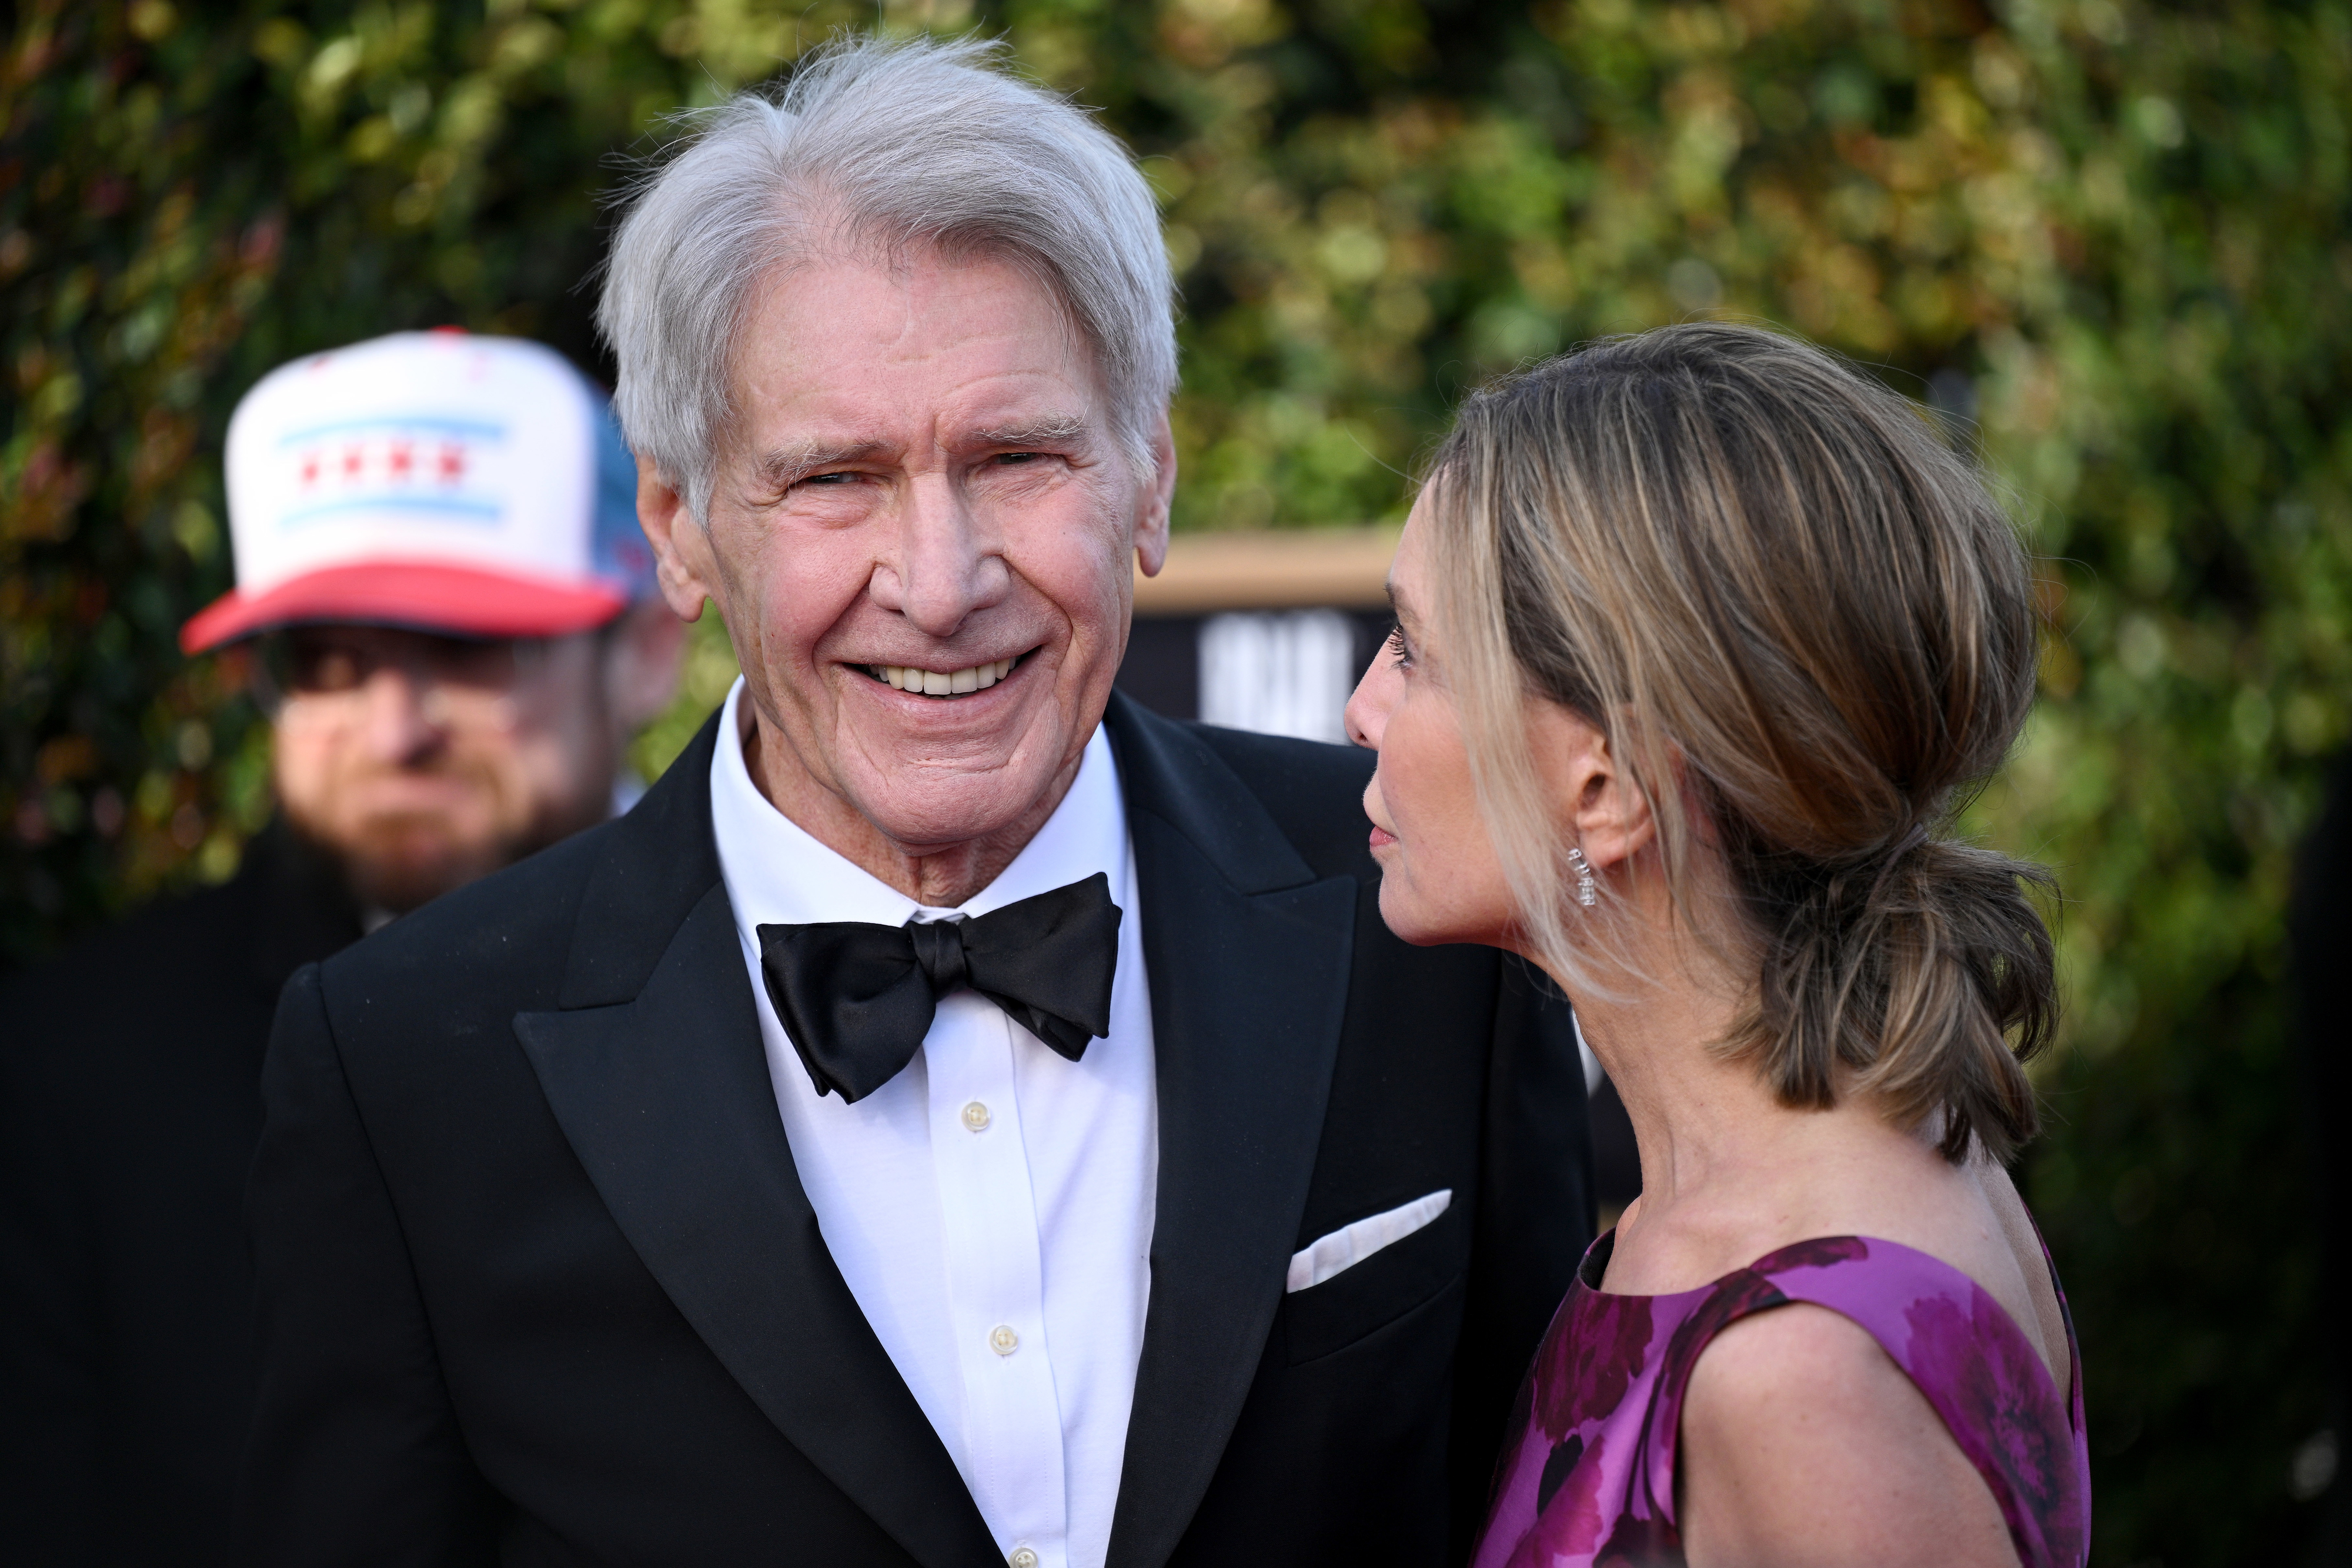 Harrison Ford in a black tuxedo with a bow tie shares a look with Calista Flockhart in a patterned gown